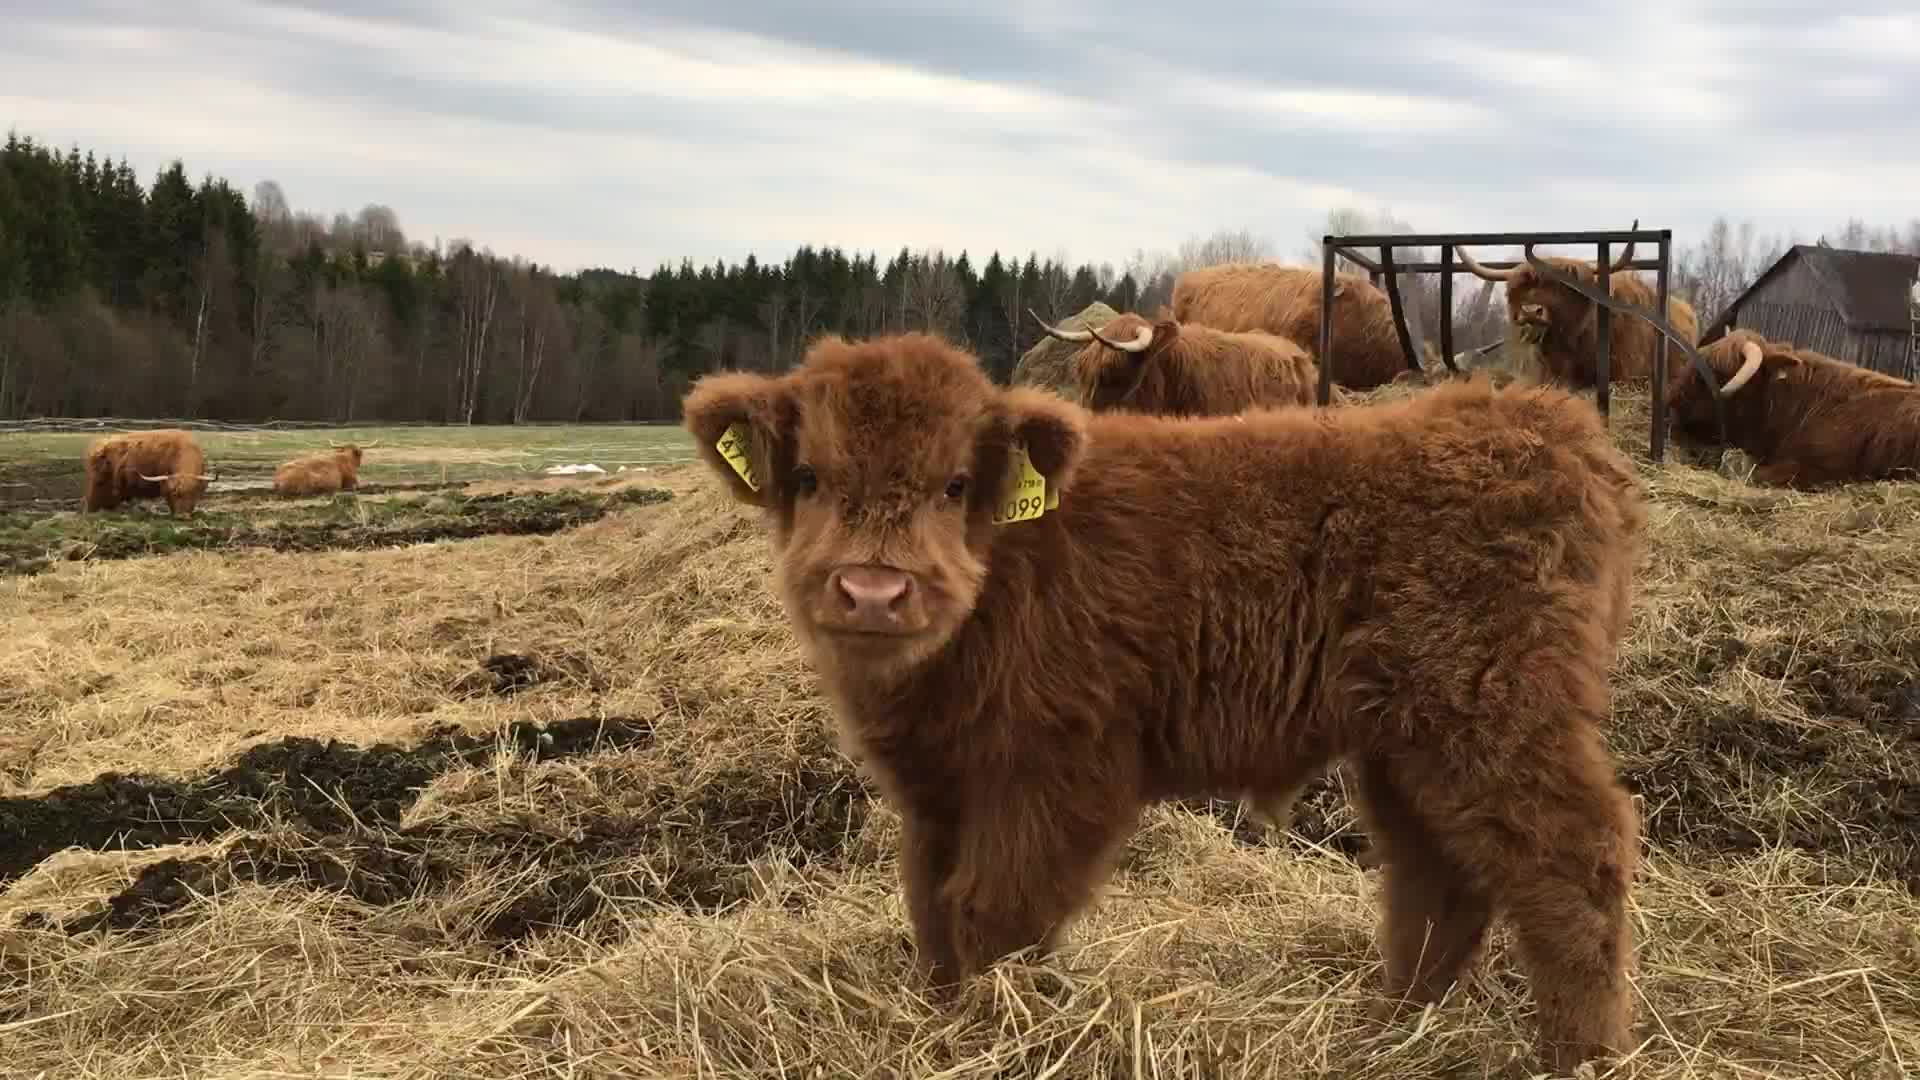 Scottish Highland Cattle In Finland: Osku The Fluffy Calf, Always Ready For Some